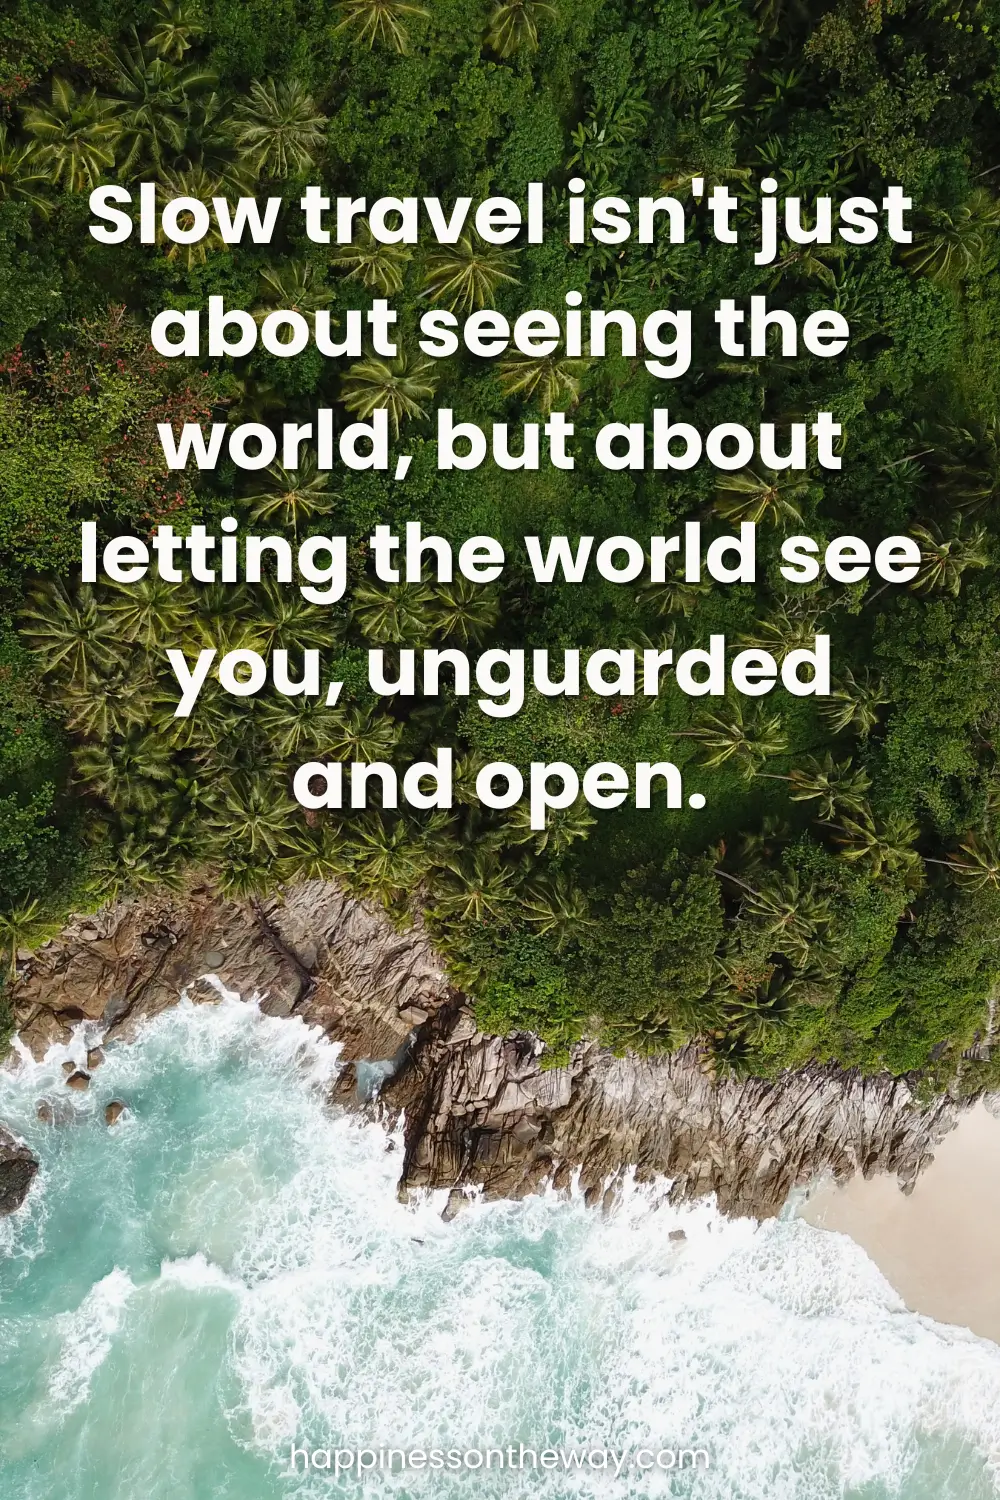 Aerial view of a tropical coastline with dense palm trees and the inspiring quote 'Slow travel isn't just about seeing the world, but about letting the world see you, unguarded and open.'